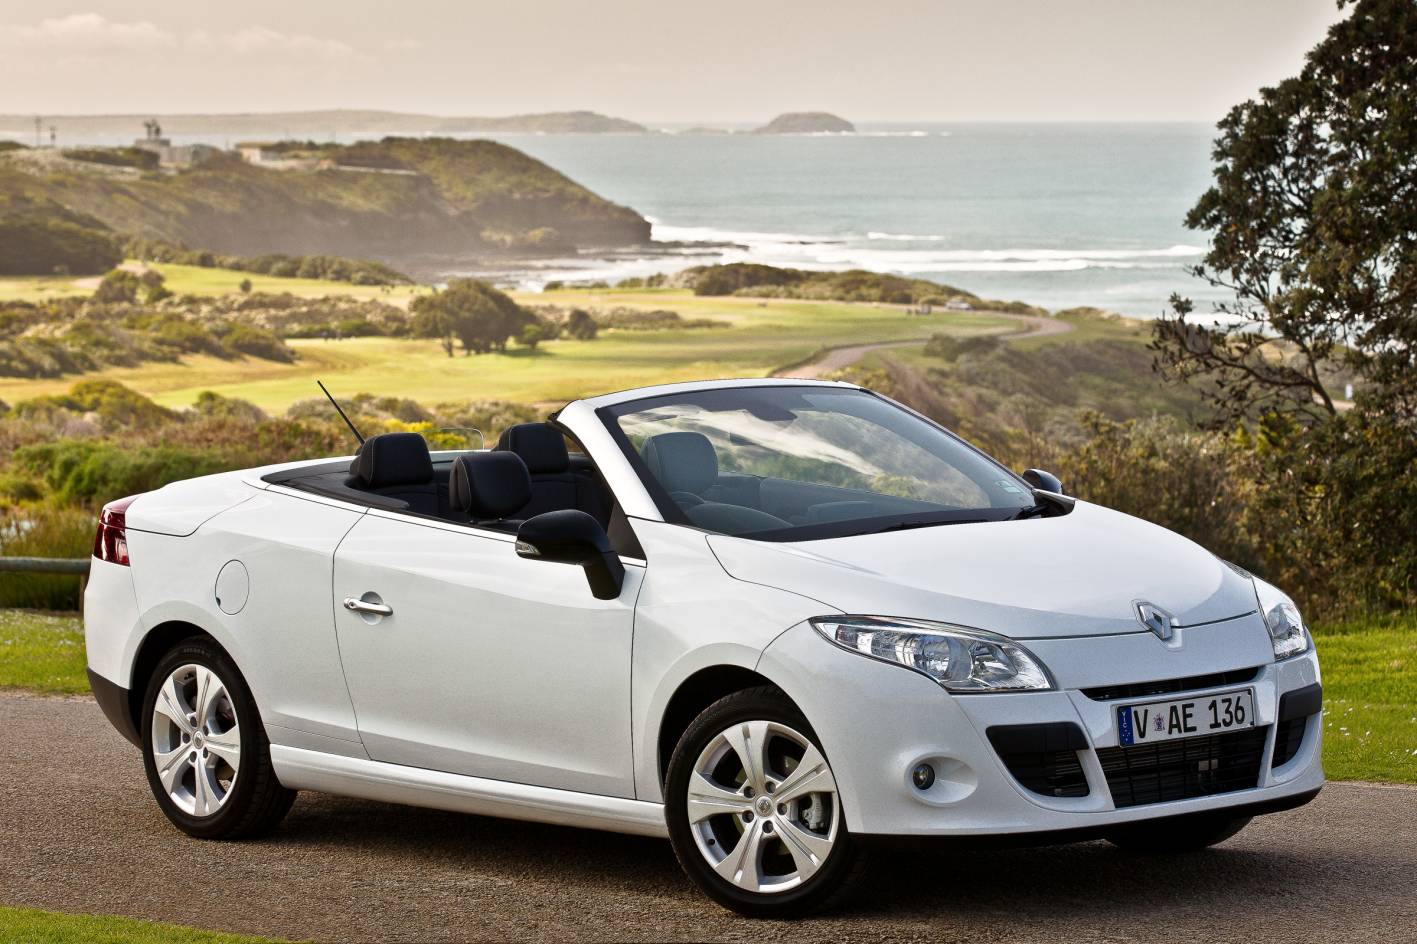 News Renault Launches AllNew Megane CoupeCabriolet